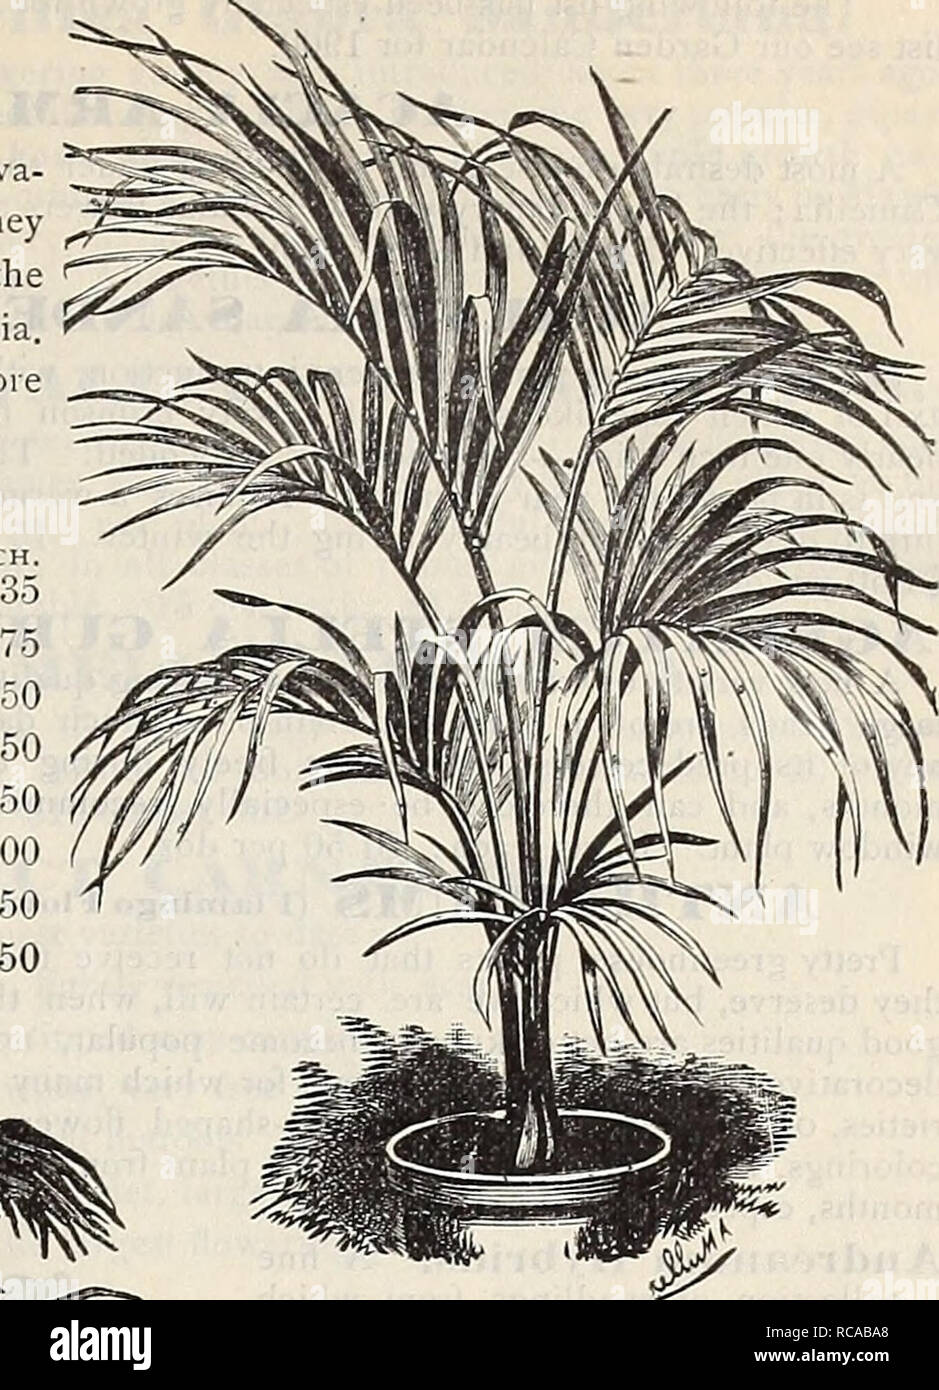 . Dreer's 1900 autumn catalogue of bulbs, plants, seeds, etc. Bulbs (Plants) Catalogs; Flowers Seeds Catalogs; Gardening Equipment and supplies Catalogs; Nurseries (Horticulture) Catalogs; Fruit Seeds Catalogs. Kentia Belmoreana. JLatauiaBorbonica. Chinese Fan Palm. This popular variety is too well known to require description. (See cut.) 10 00 15 00 Puts LEAVES. HEIGHT. EACH. 3-inch 4 to 5 12 ncbes. §0 25 4 &quot; 5 to 6 15 50 5 &quot; 0 15 1 00 6 &quot; 6 20 1 50 7 &quot; 6 to 7 24 2 50 8. &quot; 7 to 8 30 5 00. Please note that these images are extracted from scanned page images that may ha Stock Photo